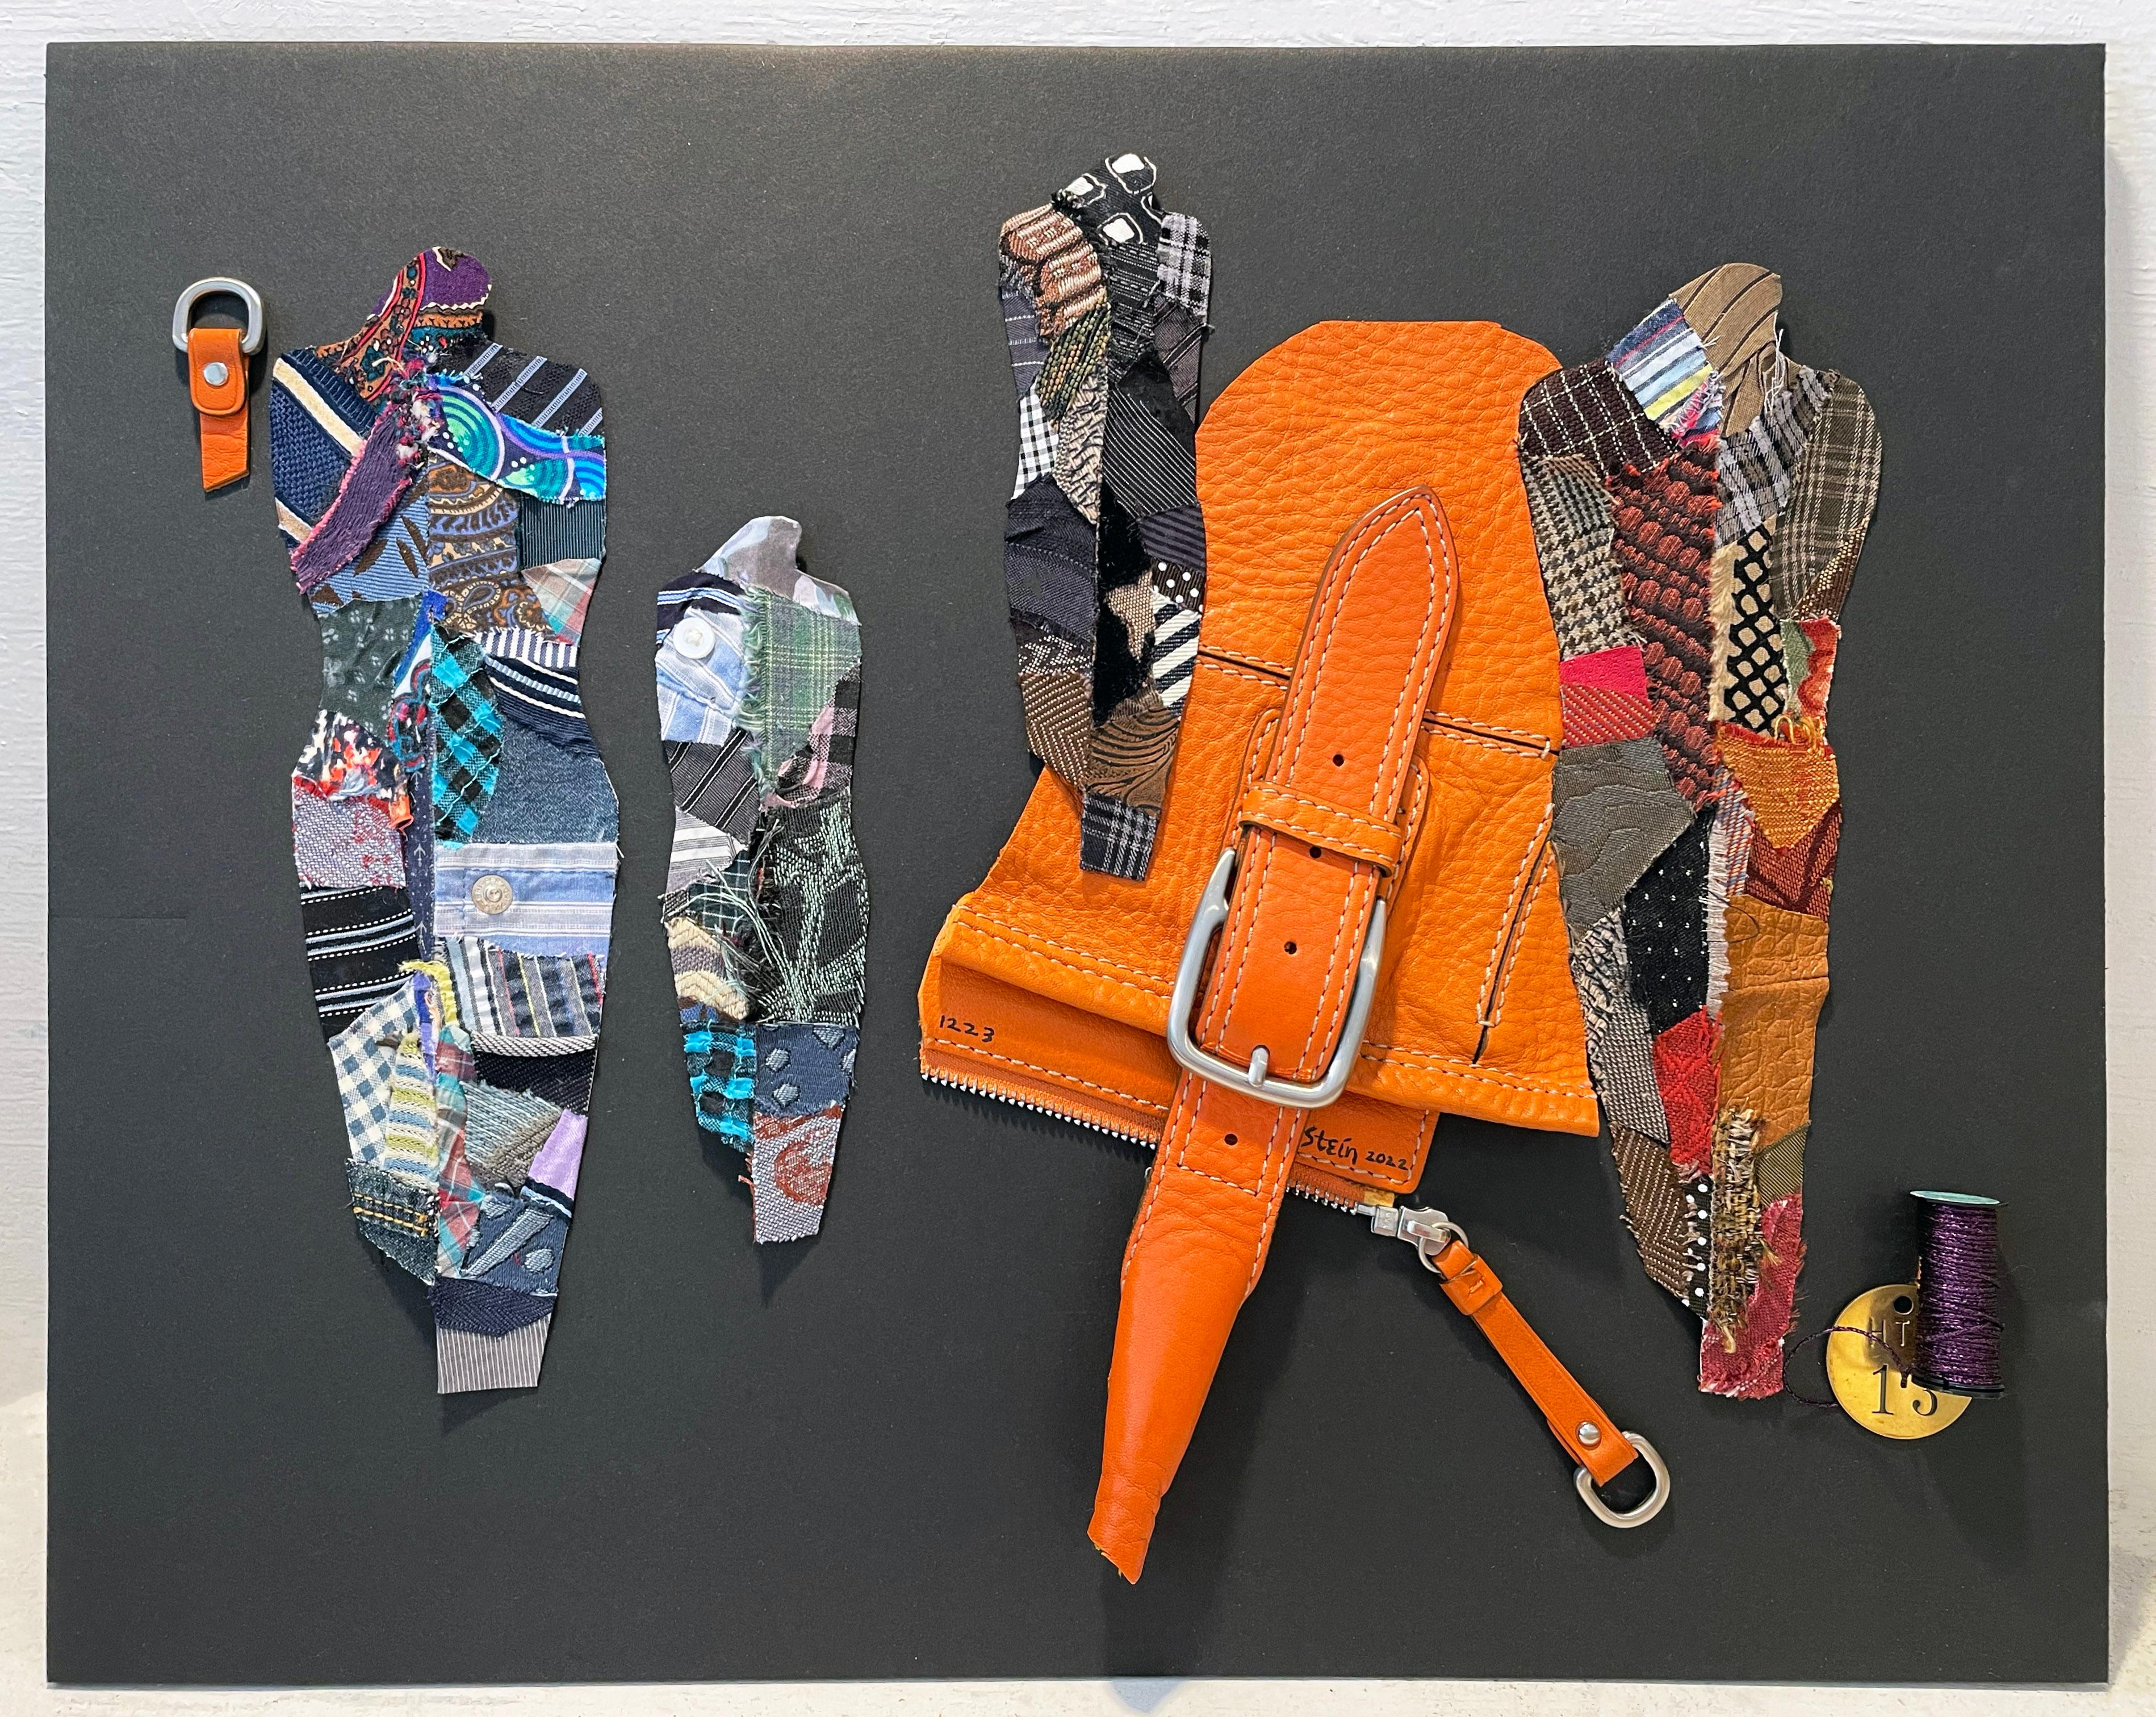 Linda Stein, 1223 - Contemporary Art 3D Mixed Media Fabric Sculptural Collage